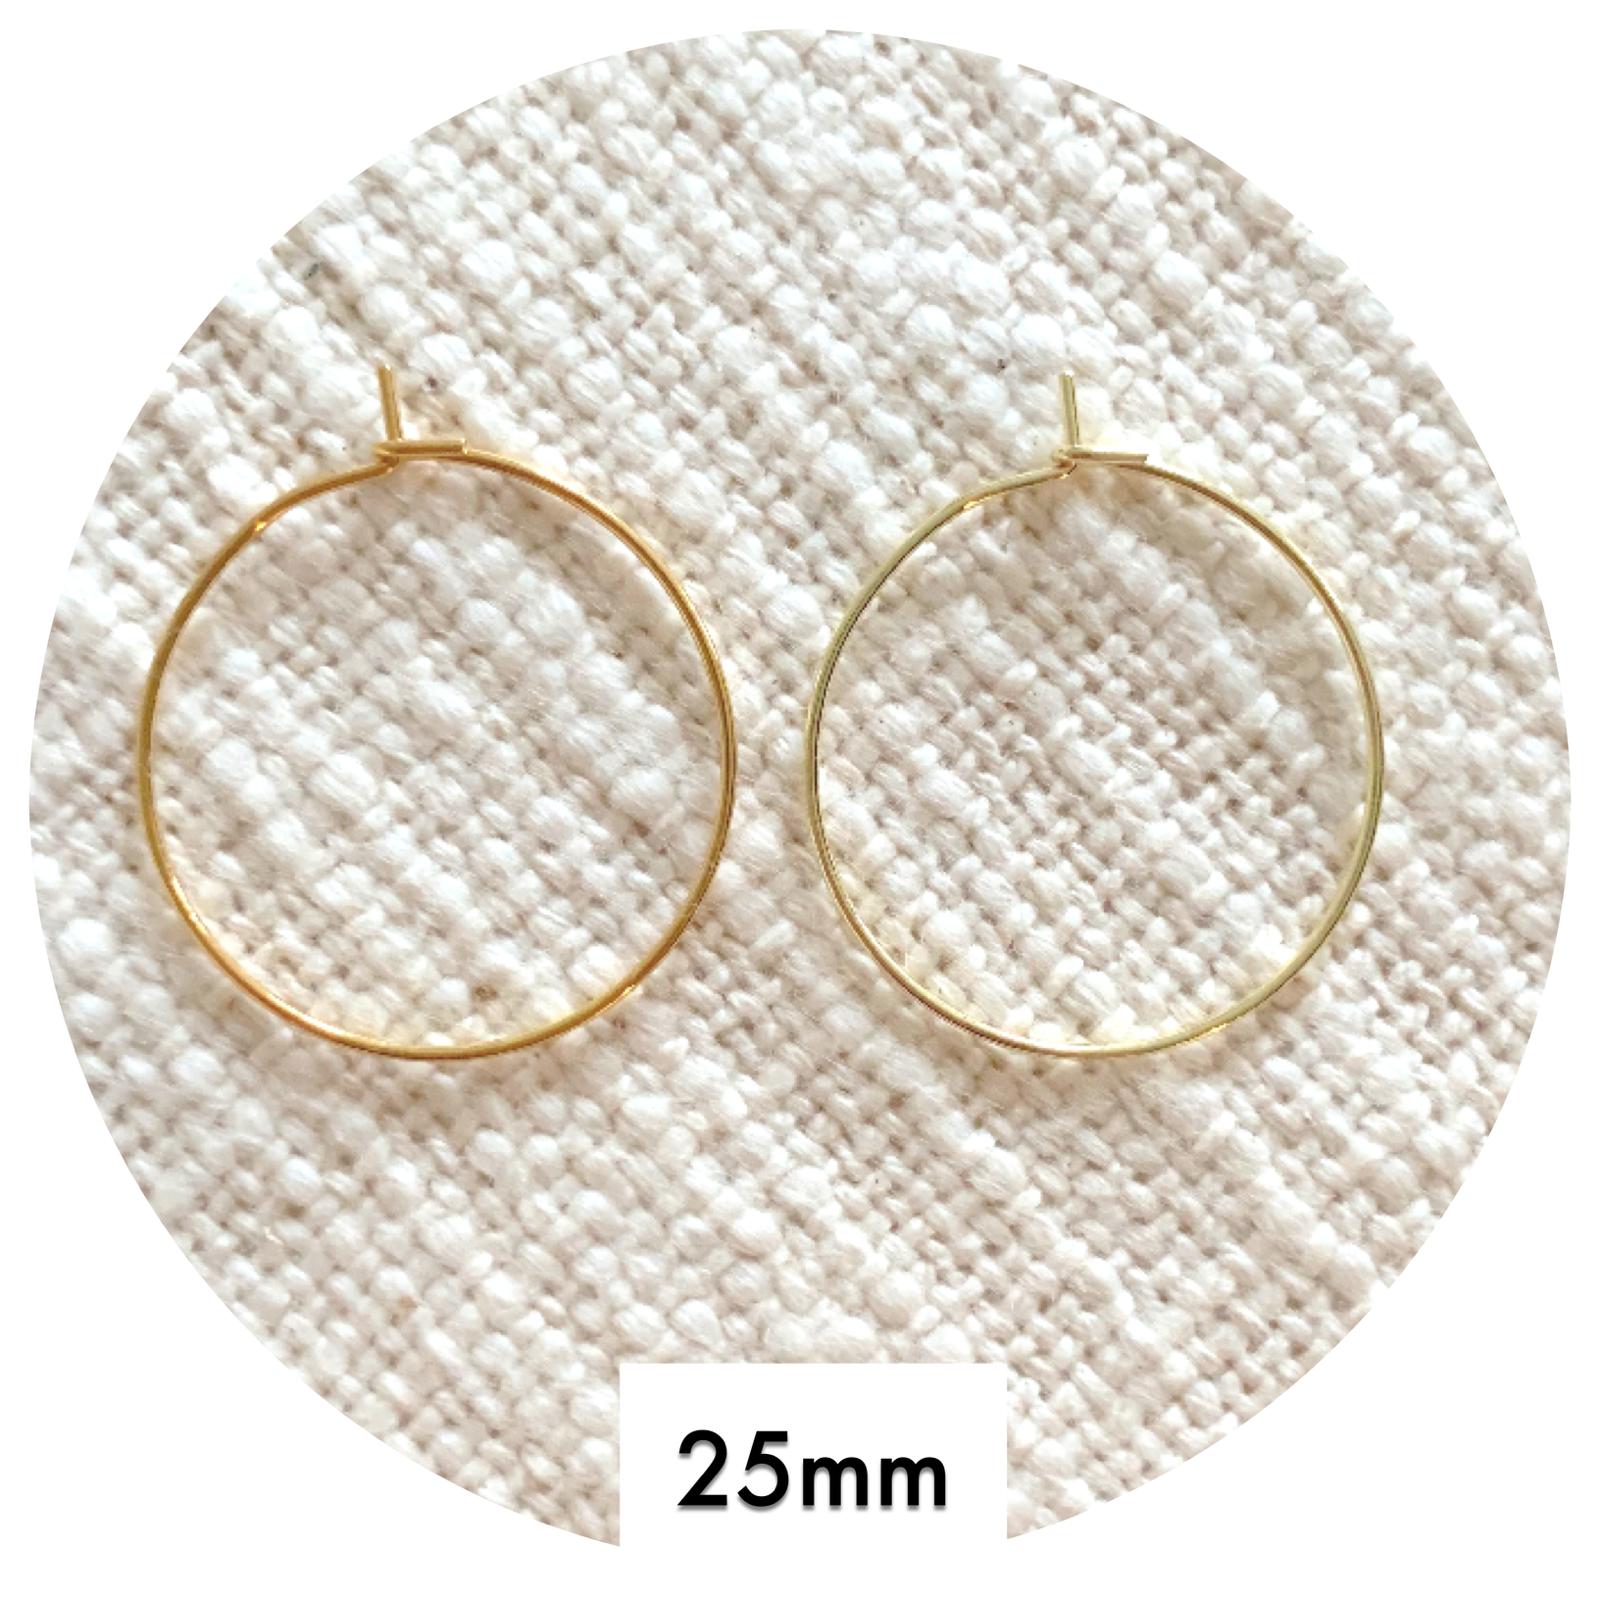 25mm Stainless Steel Earring Wire Hoops - Gold - 2 pcs (GSSHOOPS25)